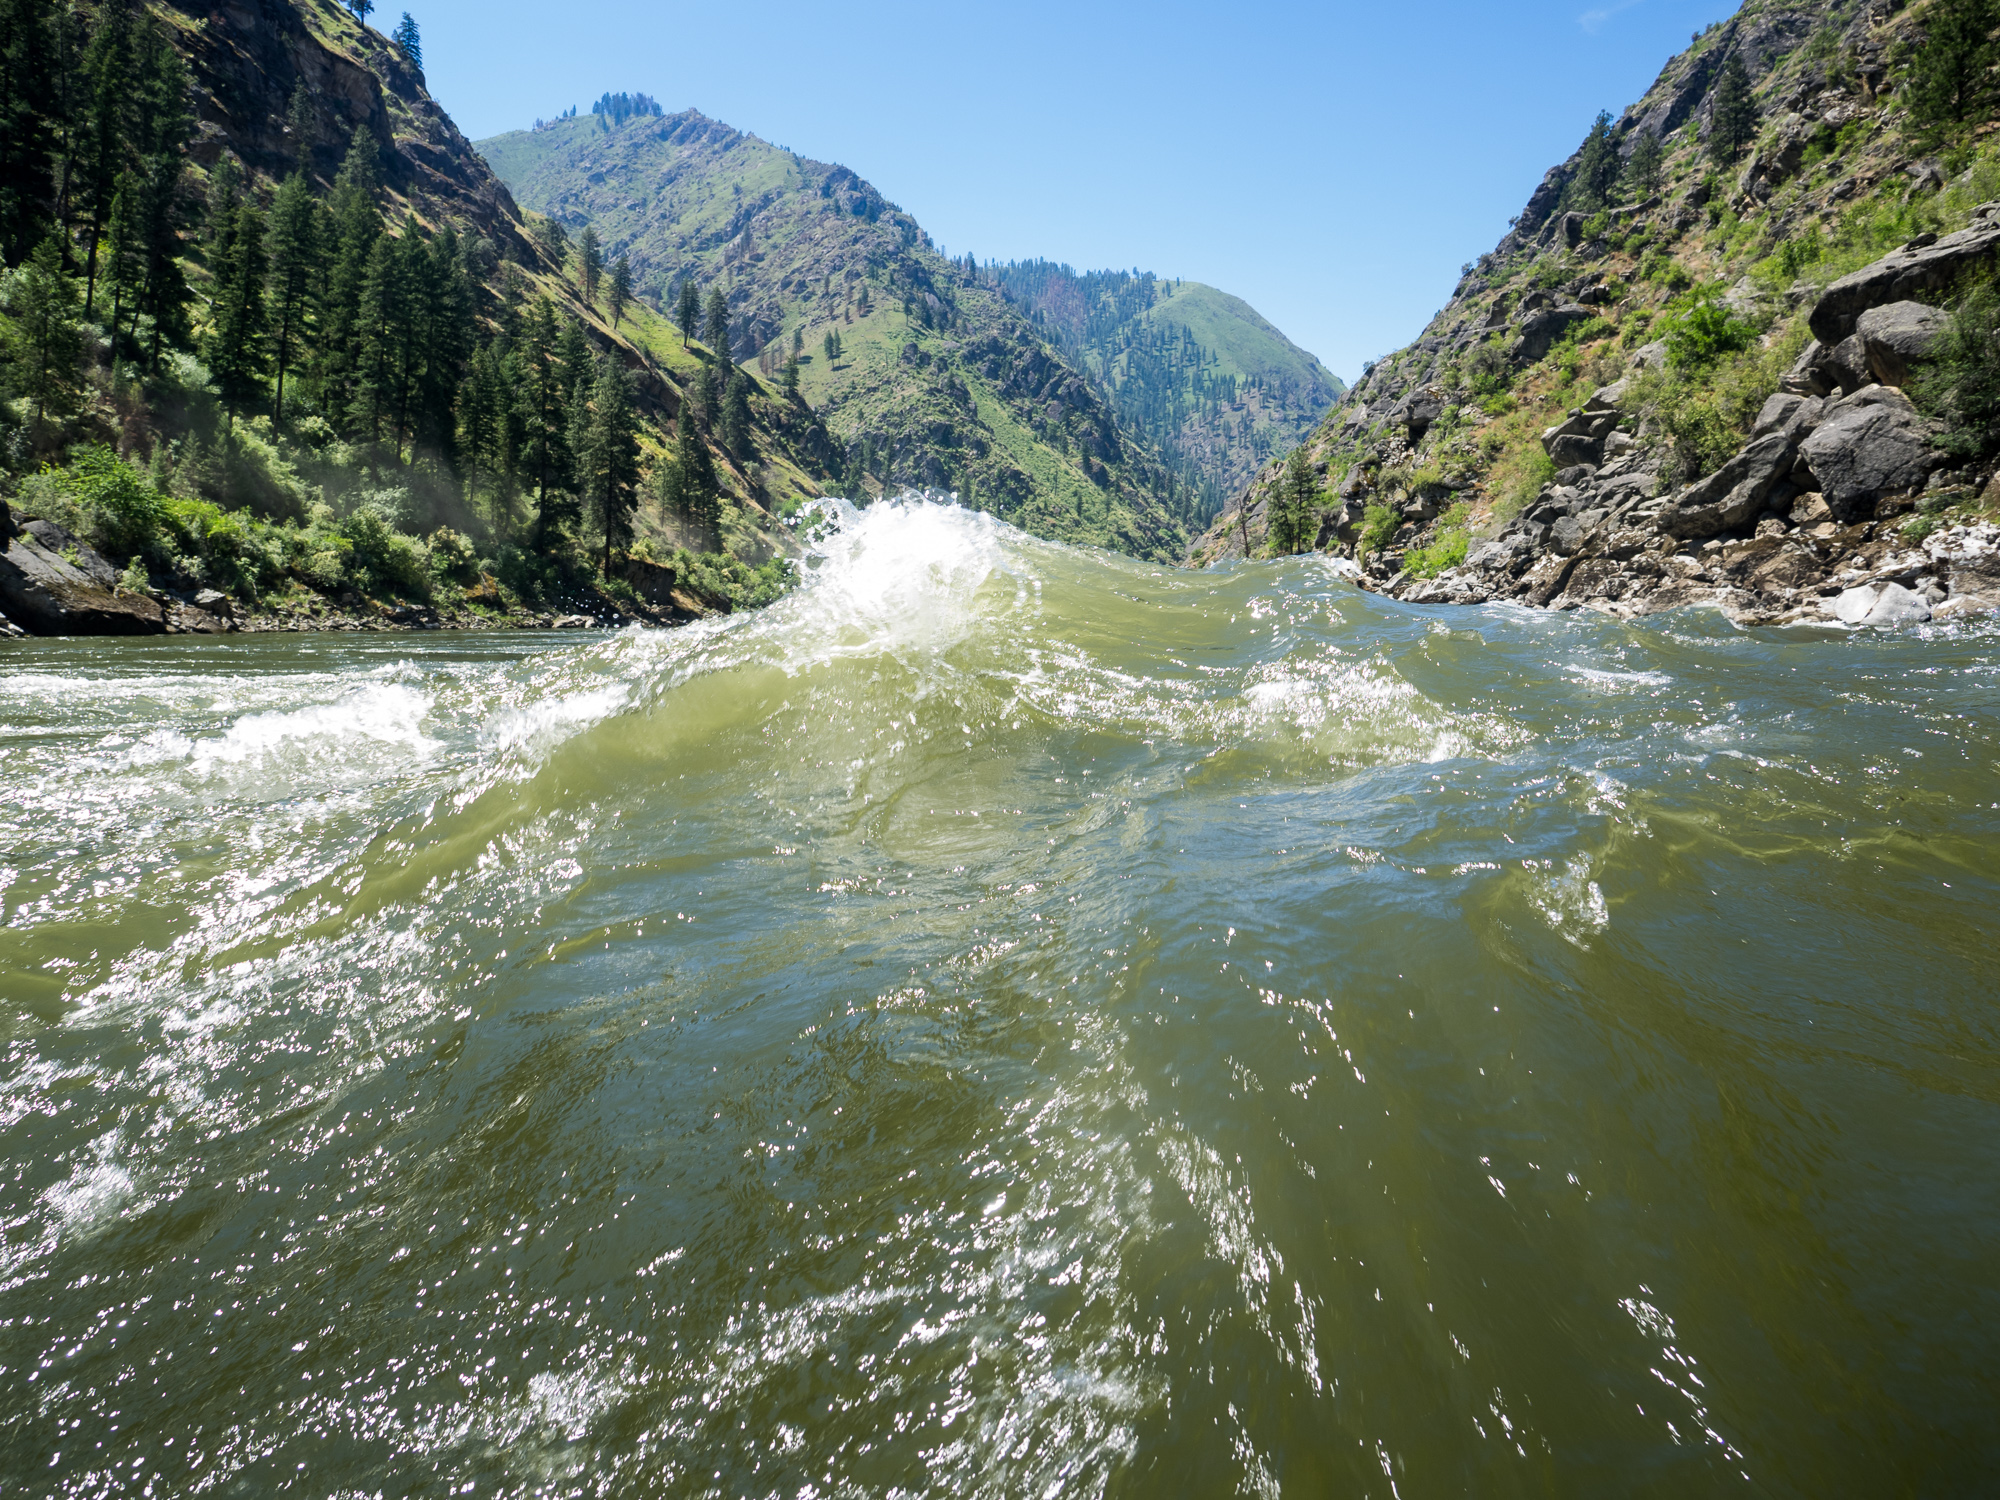 Waves and whitecaps on the Salmon River near Riggins, Idaho